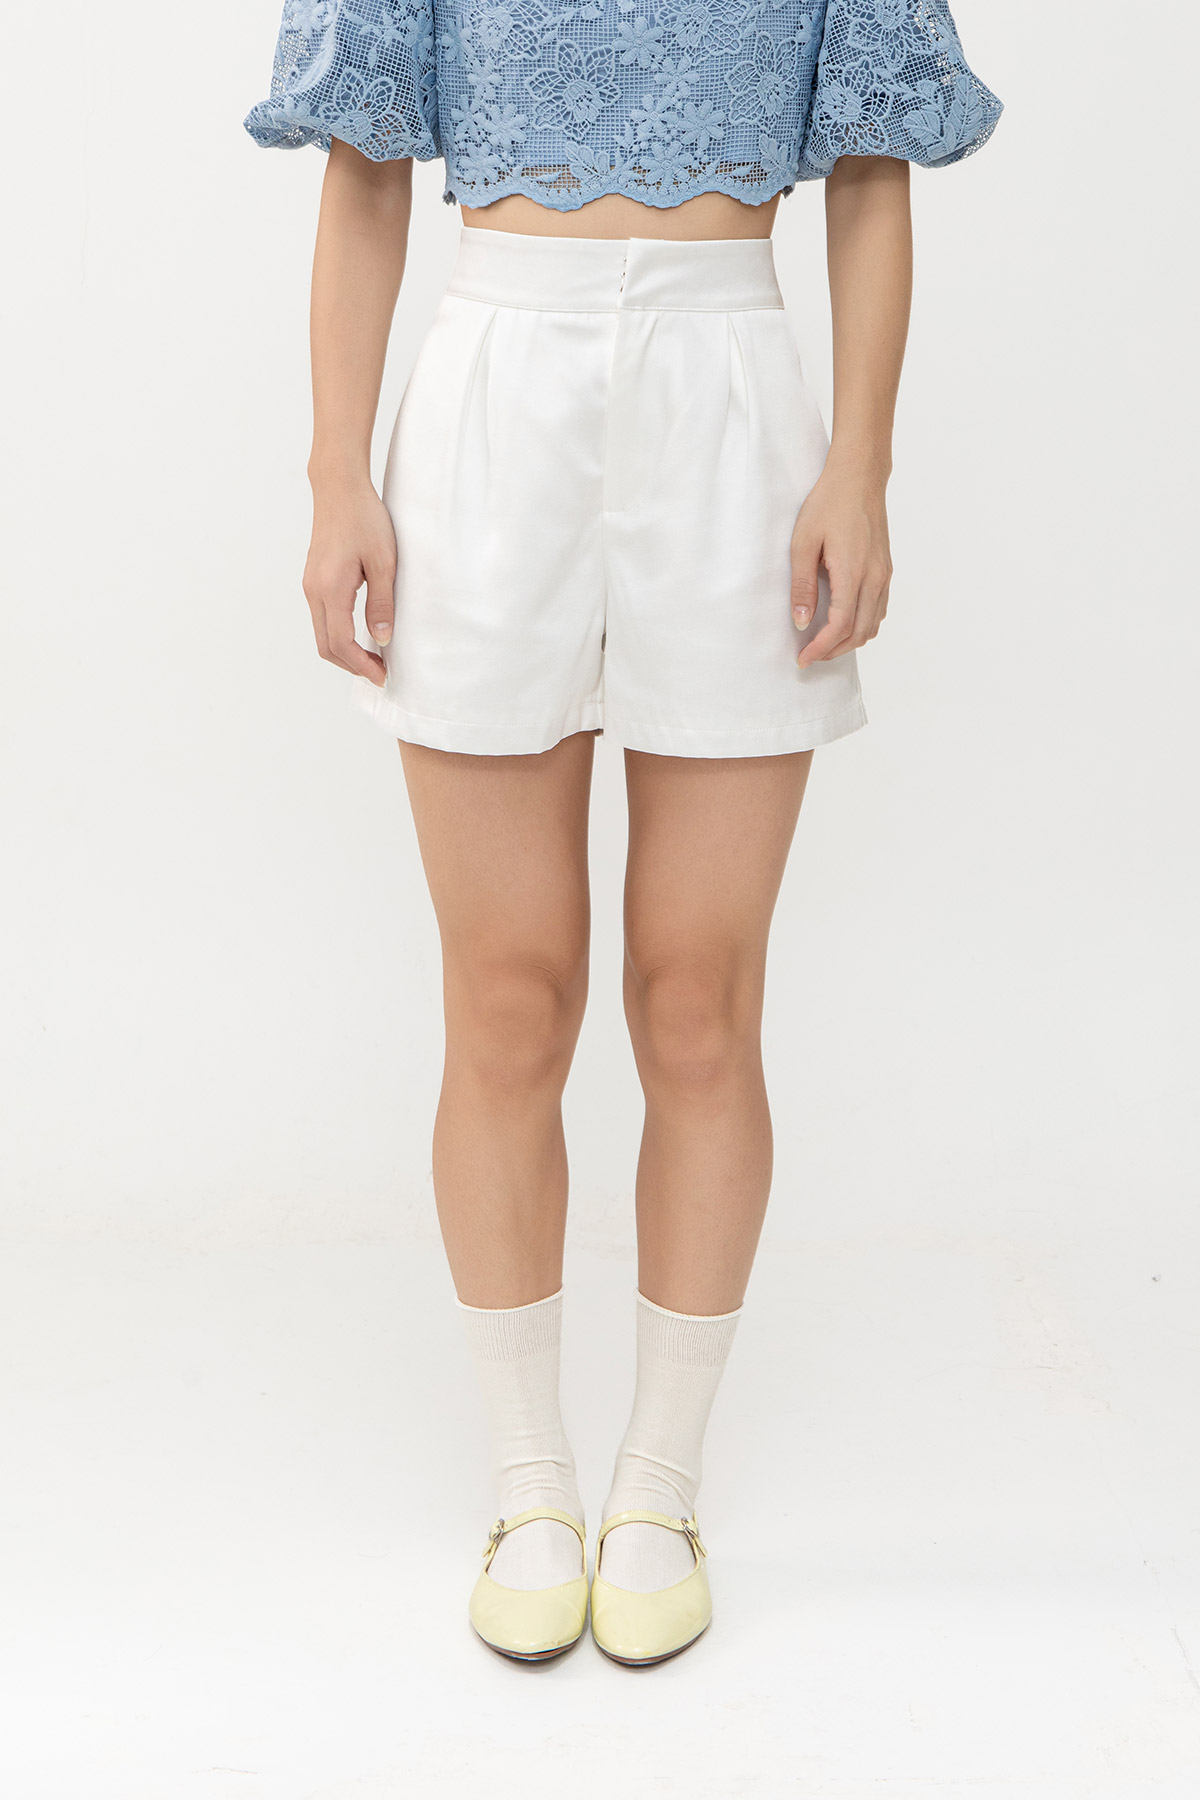 GABRIELLE SHORTS - SOFT SWAN [BY MODPARADE]